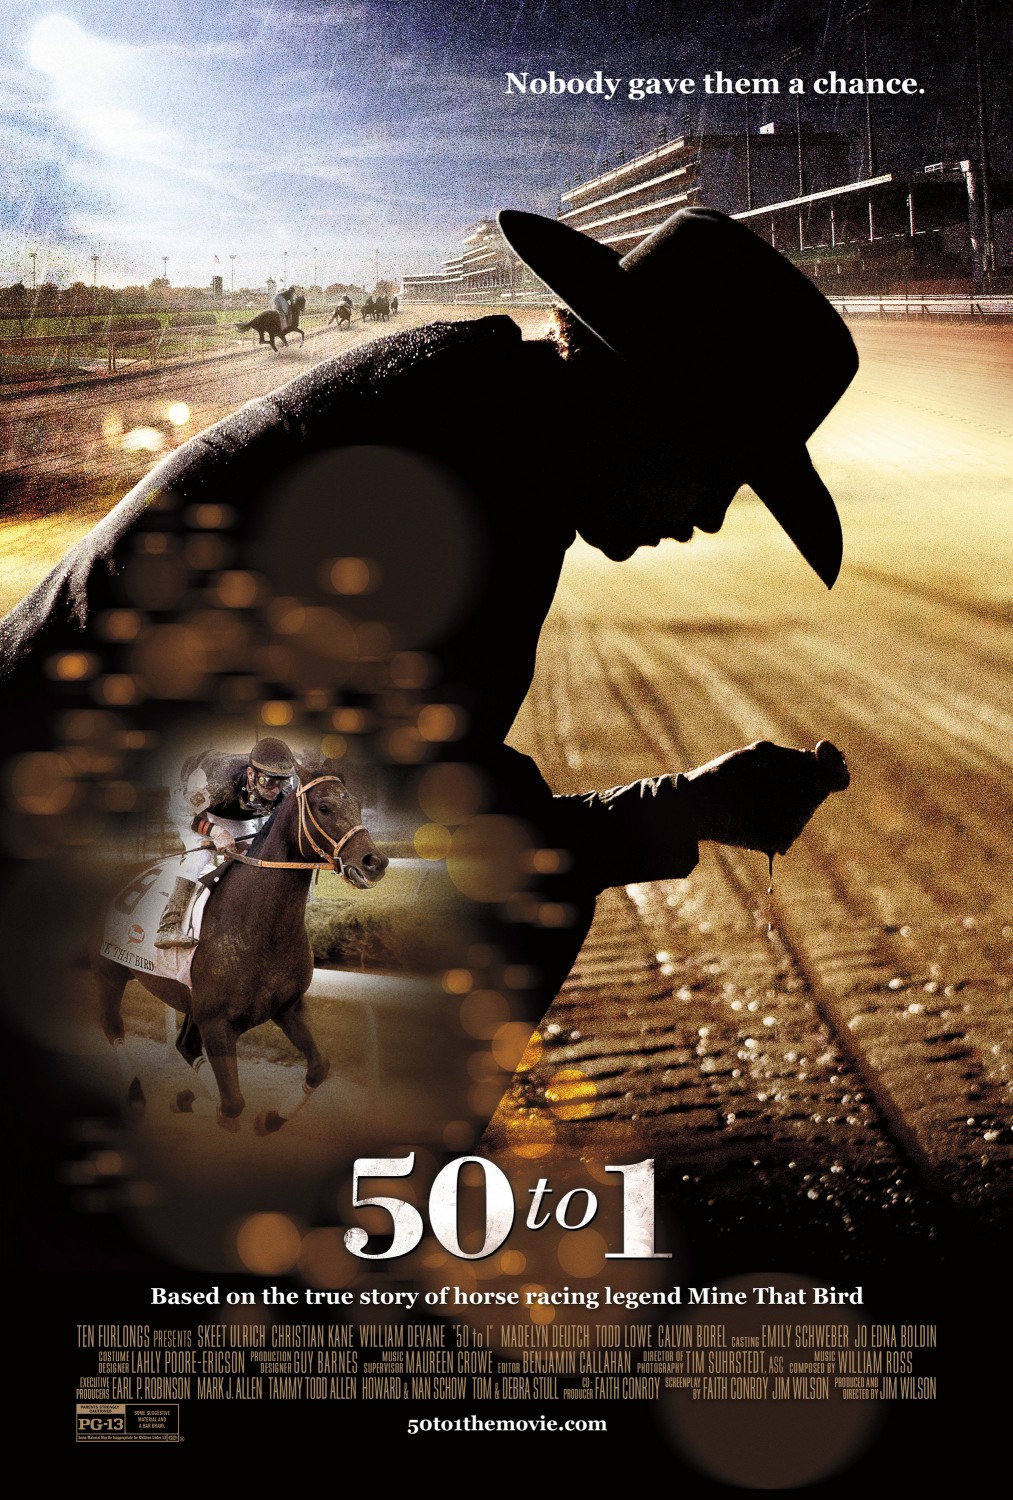 Extra Large Movie Poster Image for 50 to 1 